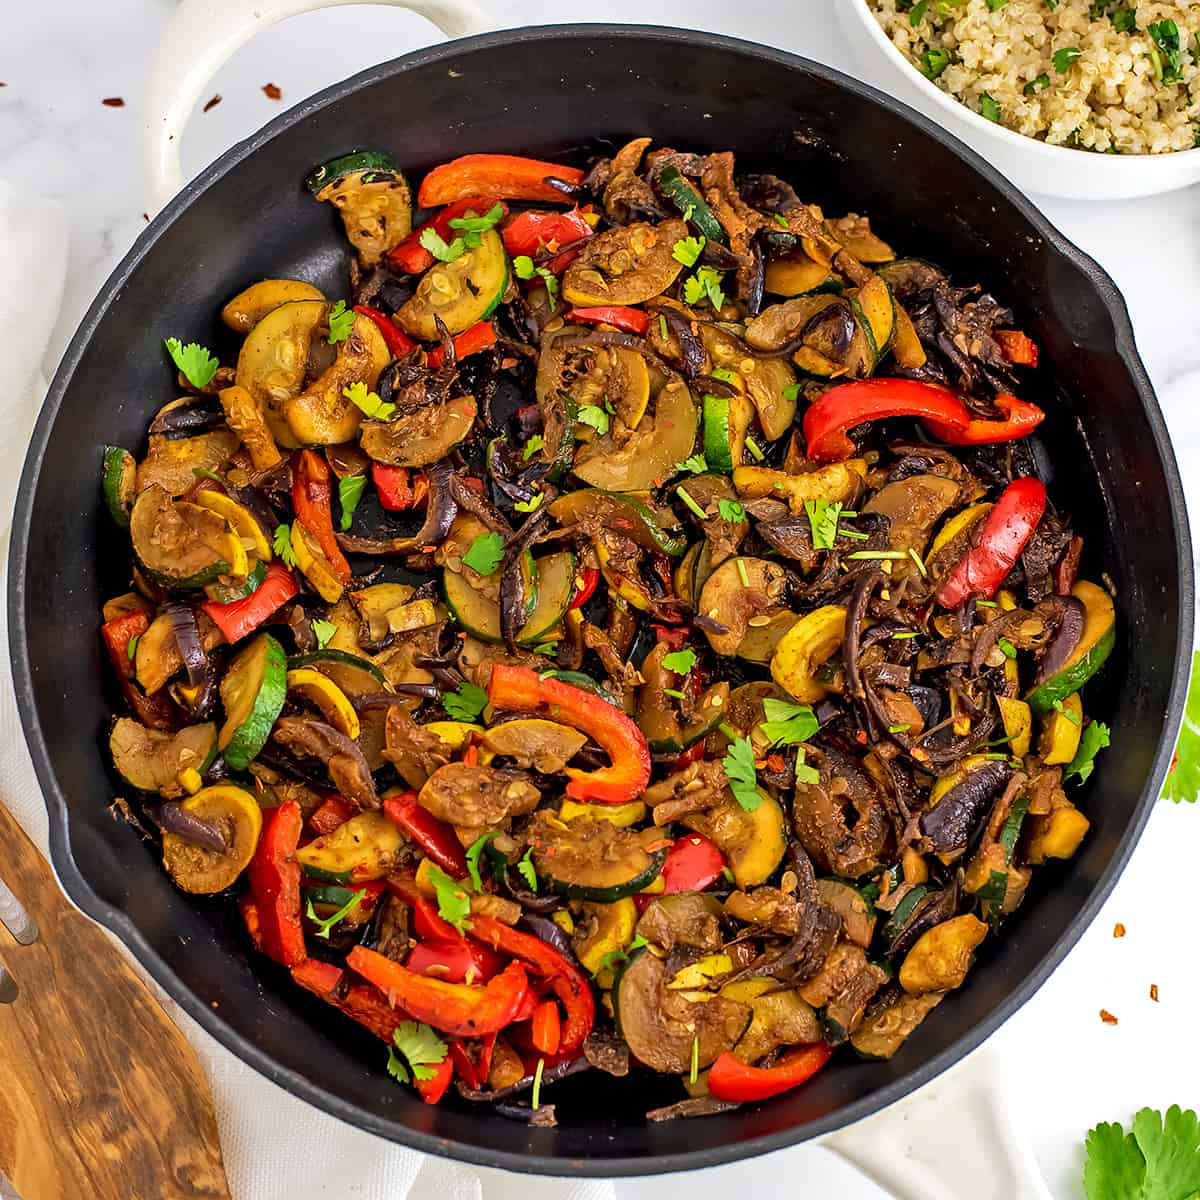 Sauteed Mexican Vegetables - Quick, Easy, Healthy | Bites of Wellness